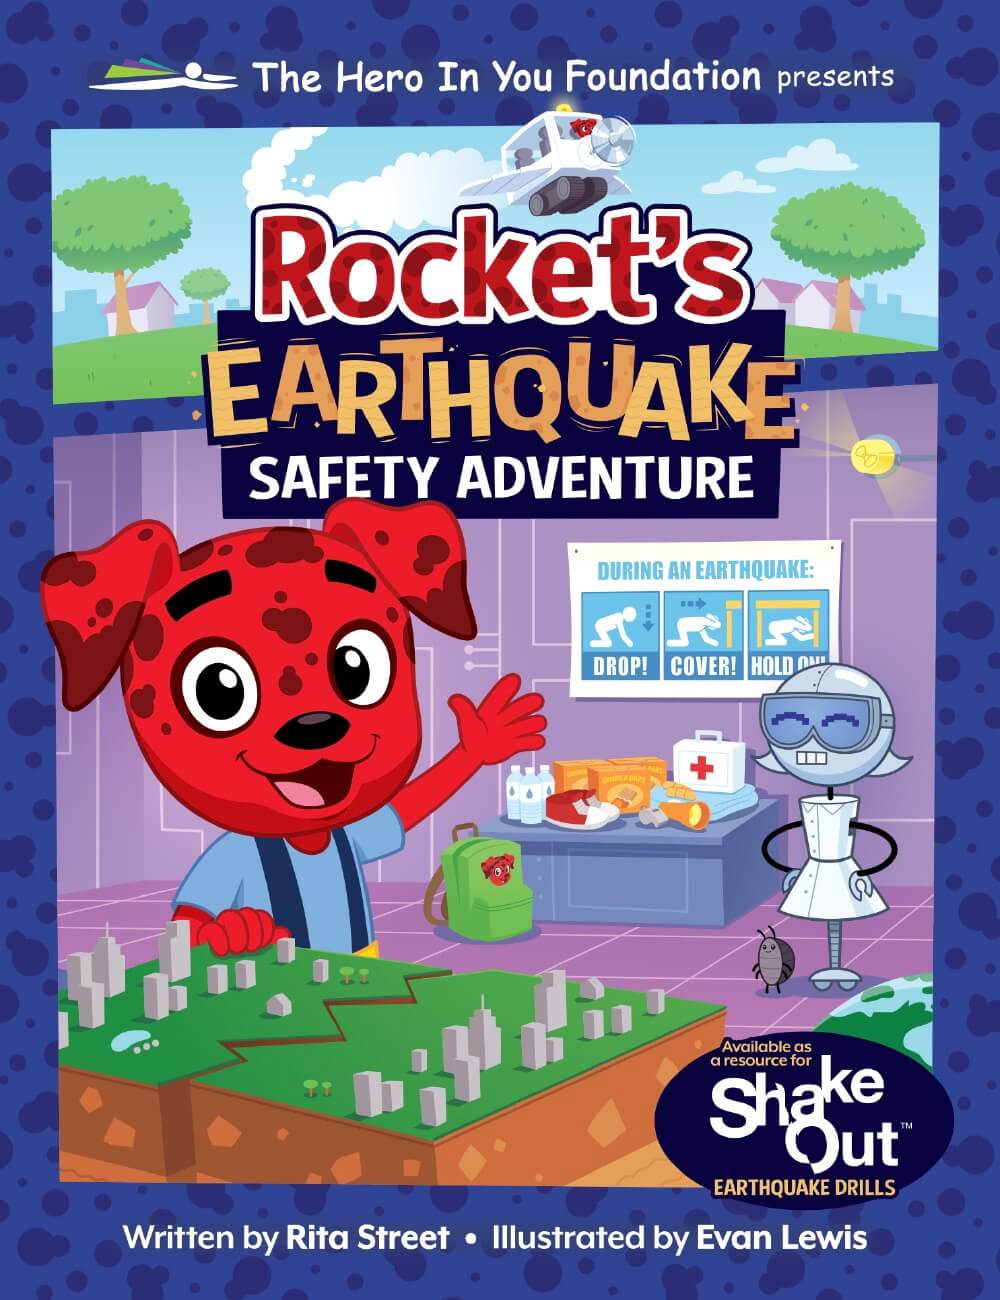 Rocket's Earthquake Safety Adventure